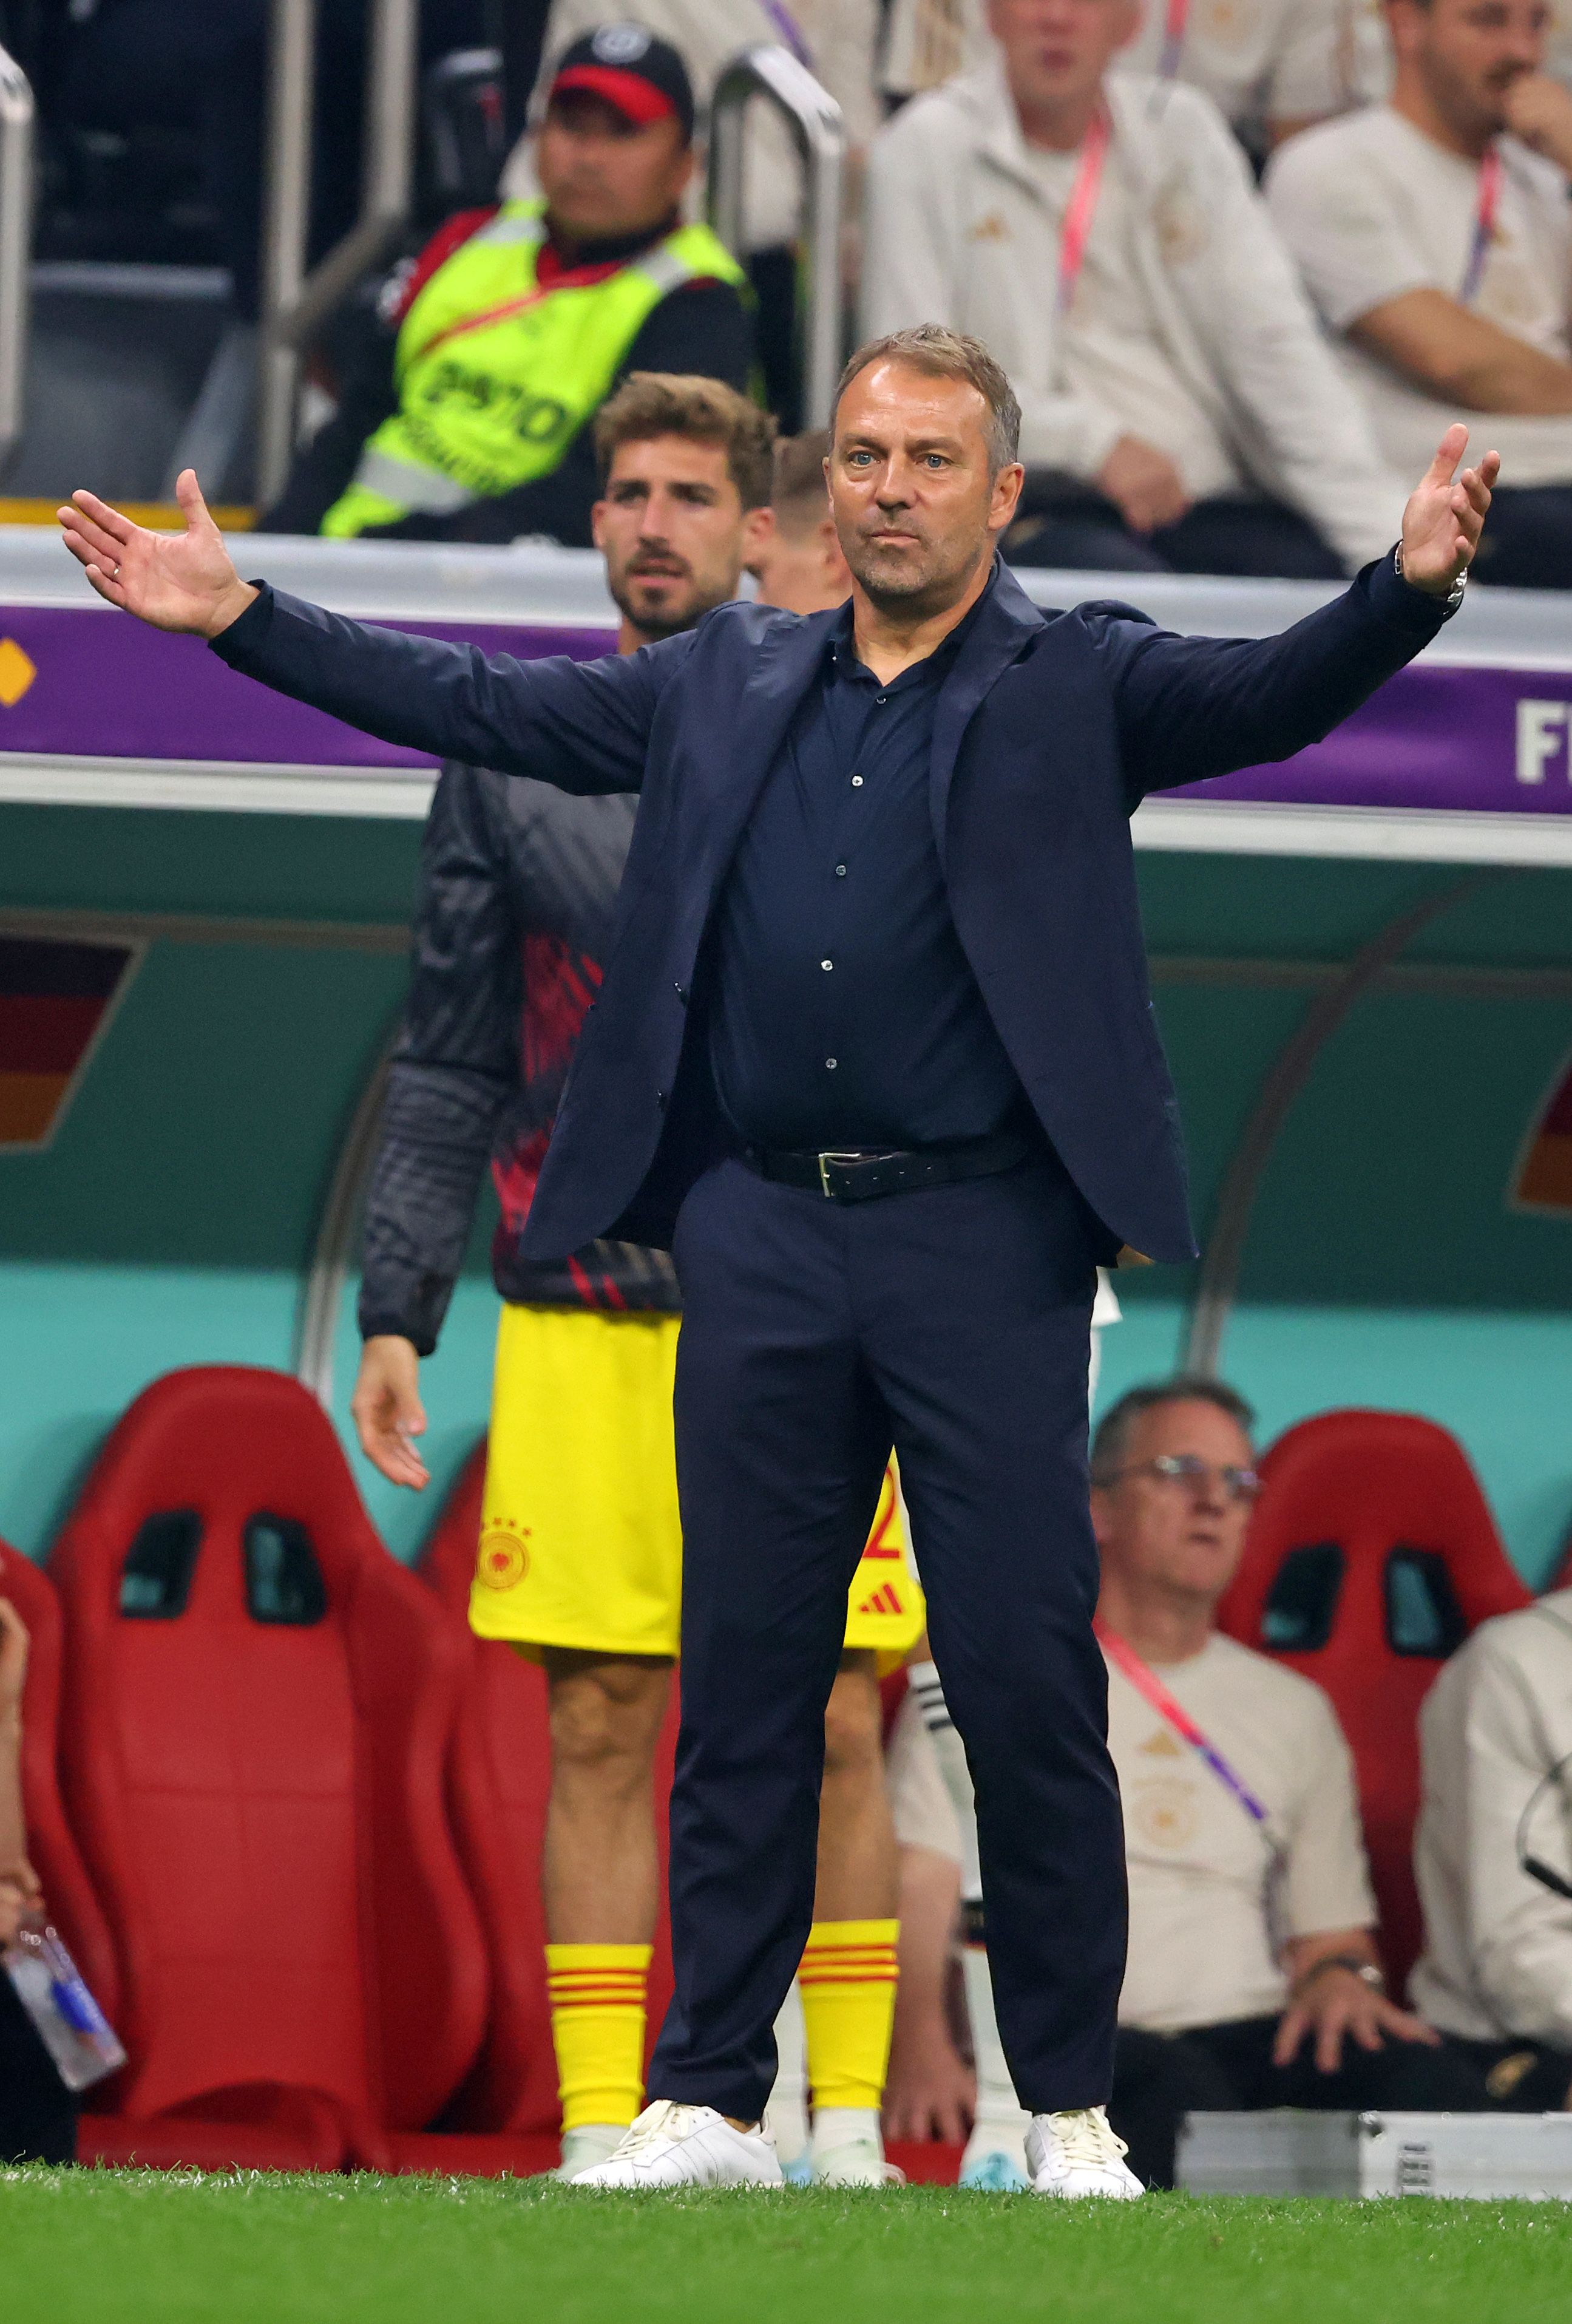 World Cup fashion: Rating the dress sense of the 32 managers - The